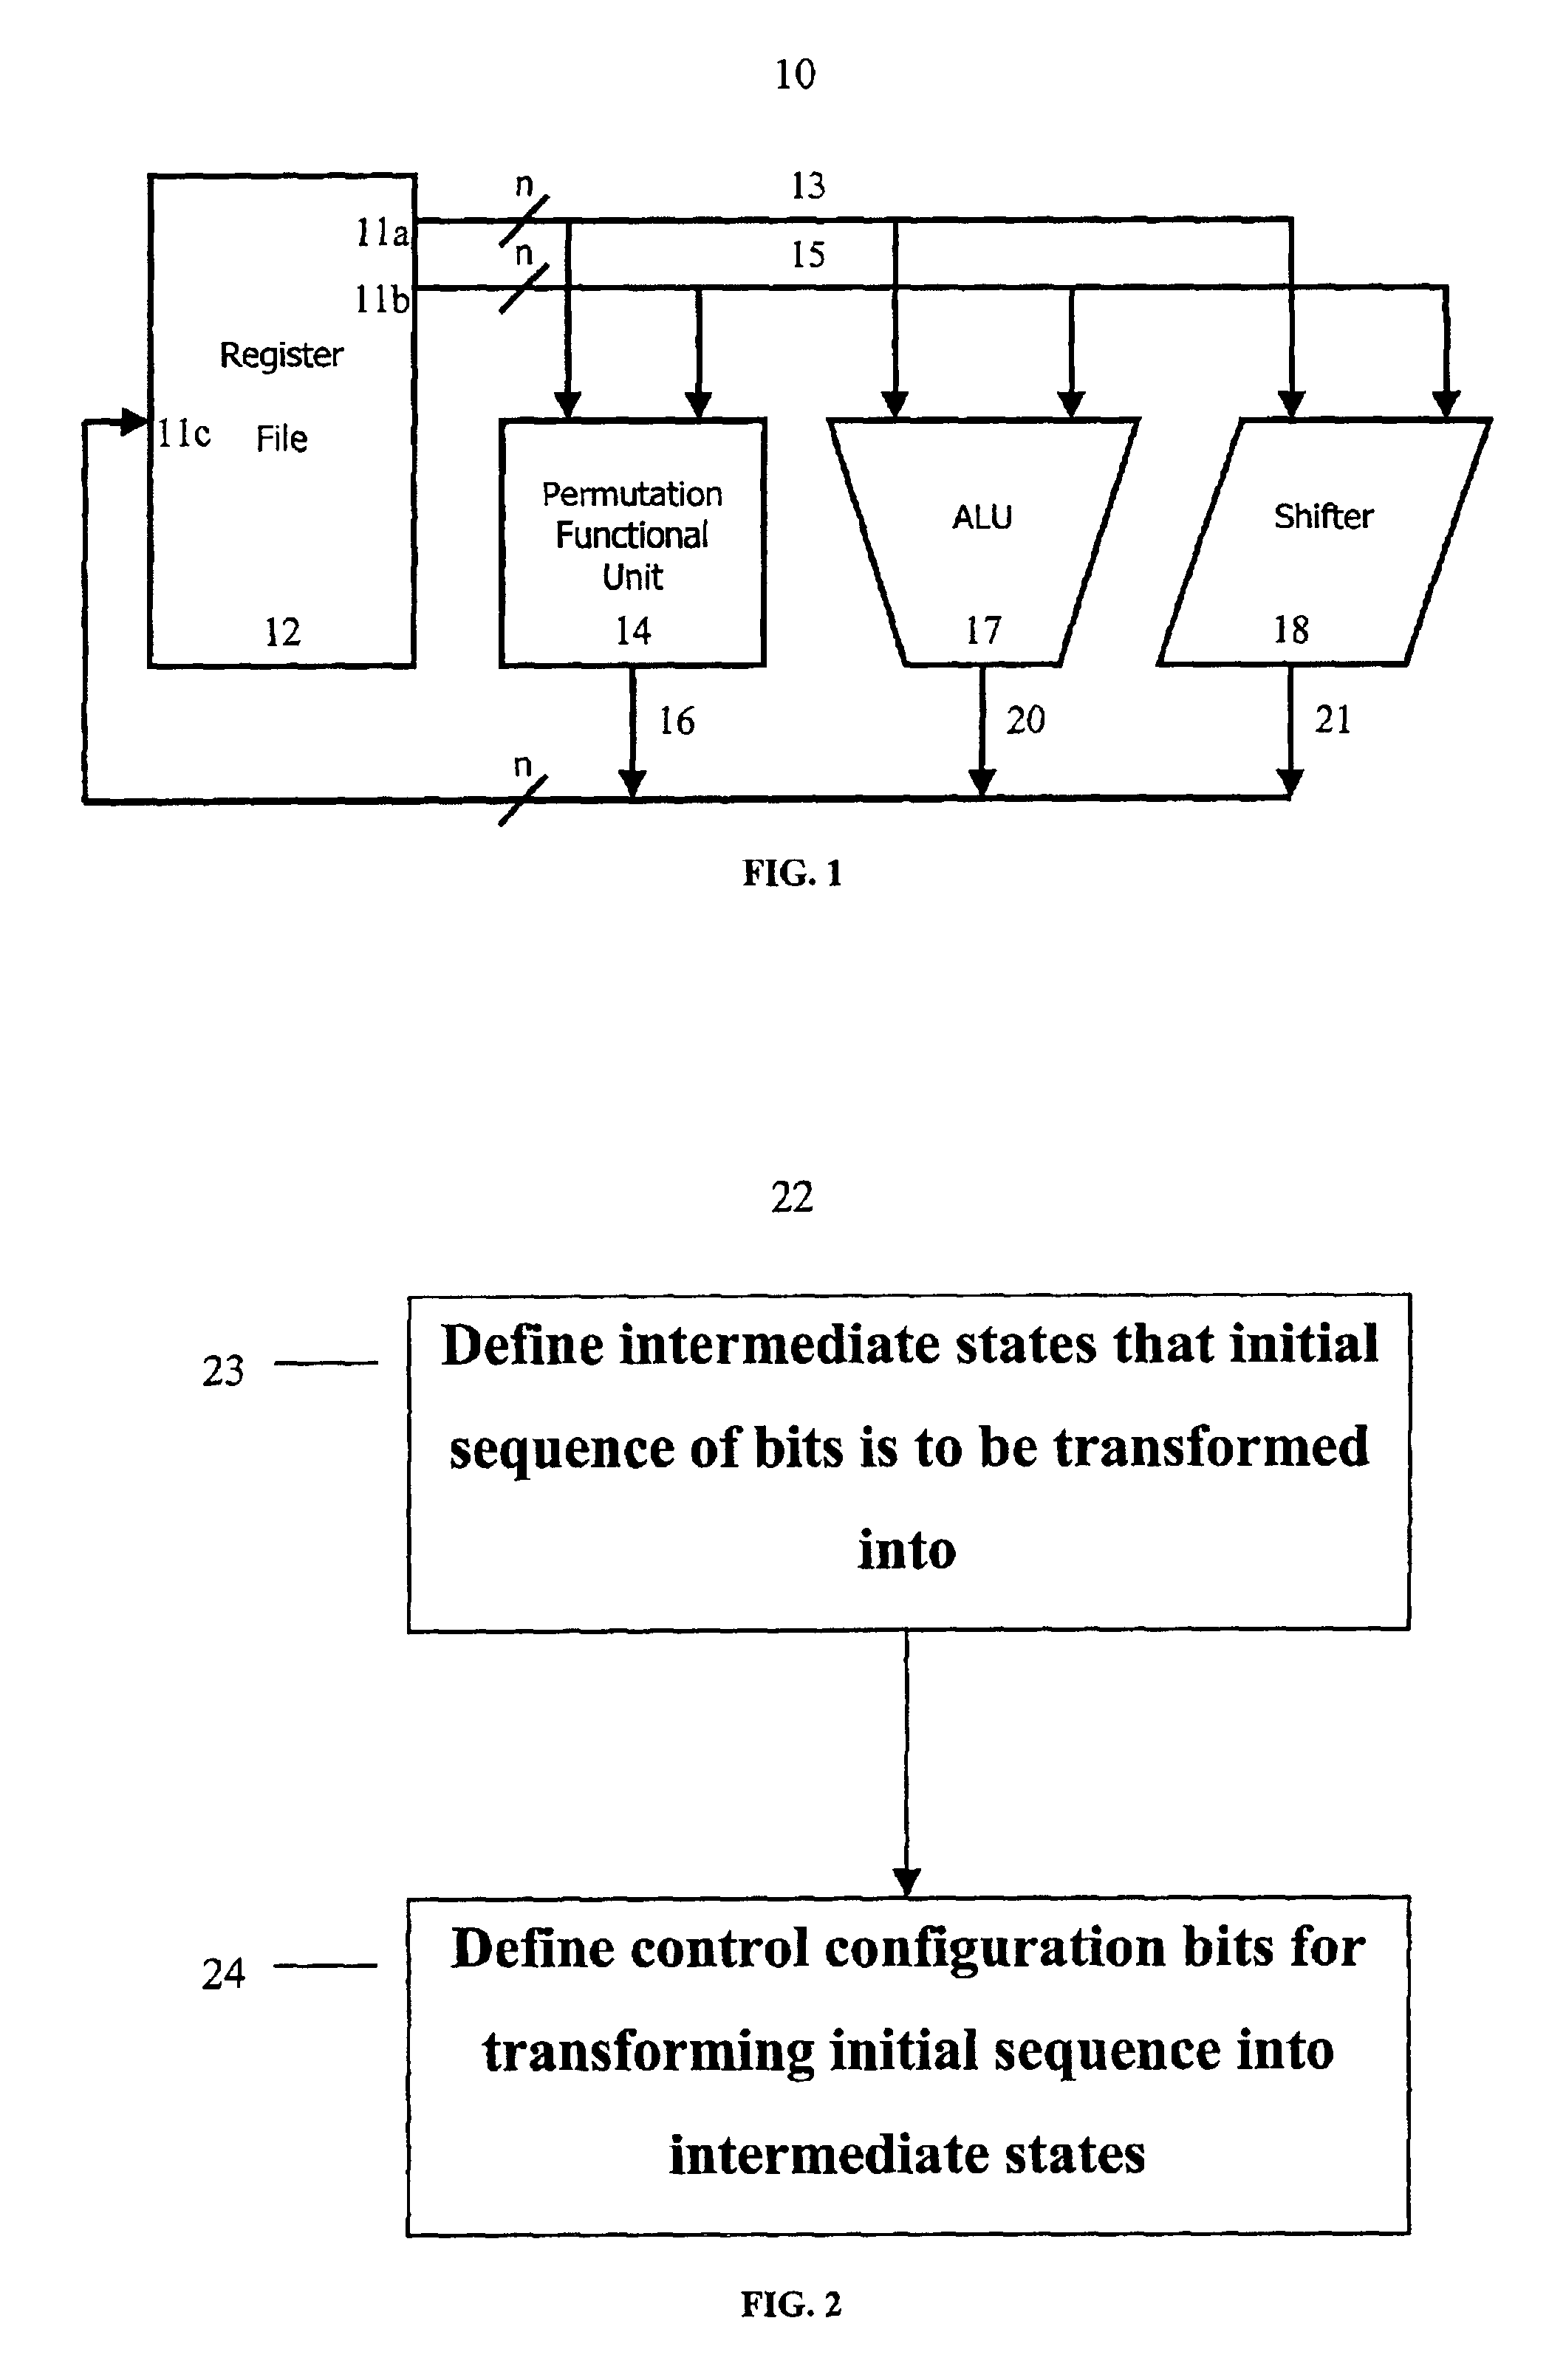 Method and system for performing permutations using permutation instructions based on modified omega and flip stages